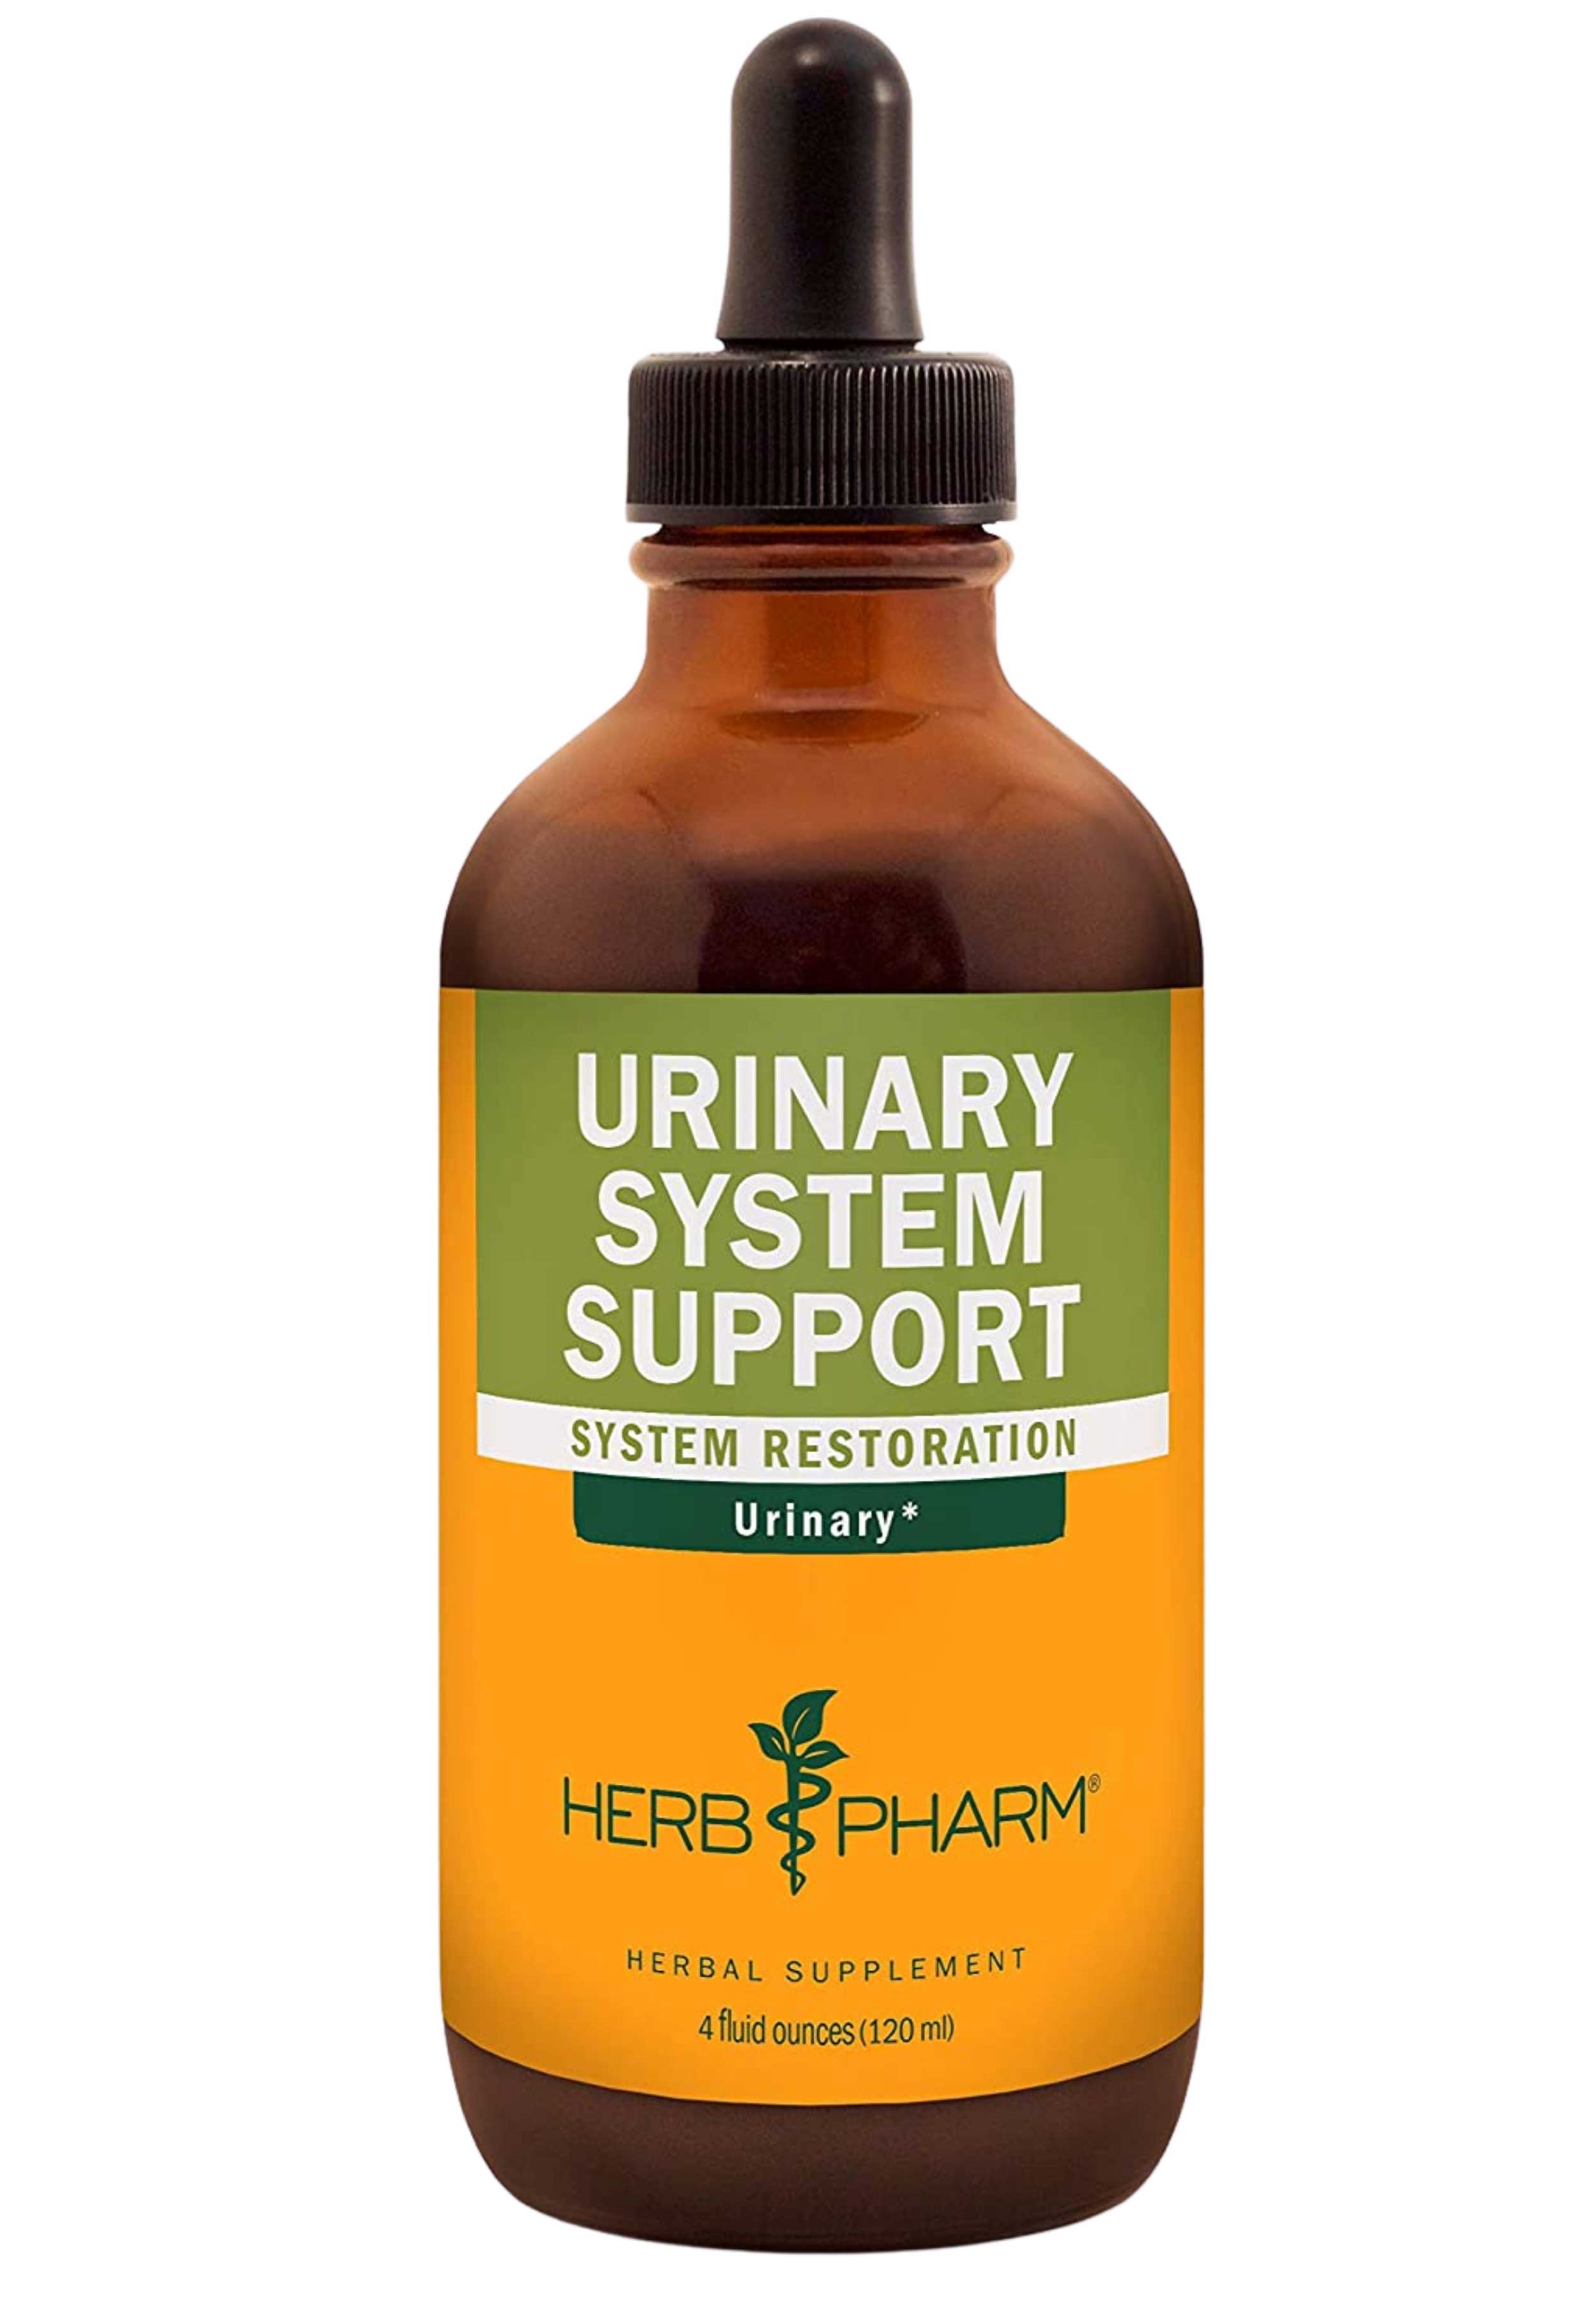 Herb Pharm Urinary System Support Ingredients